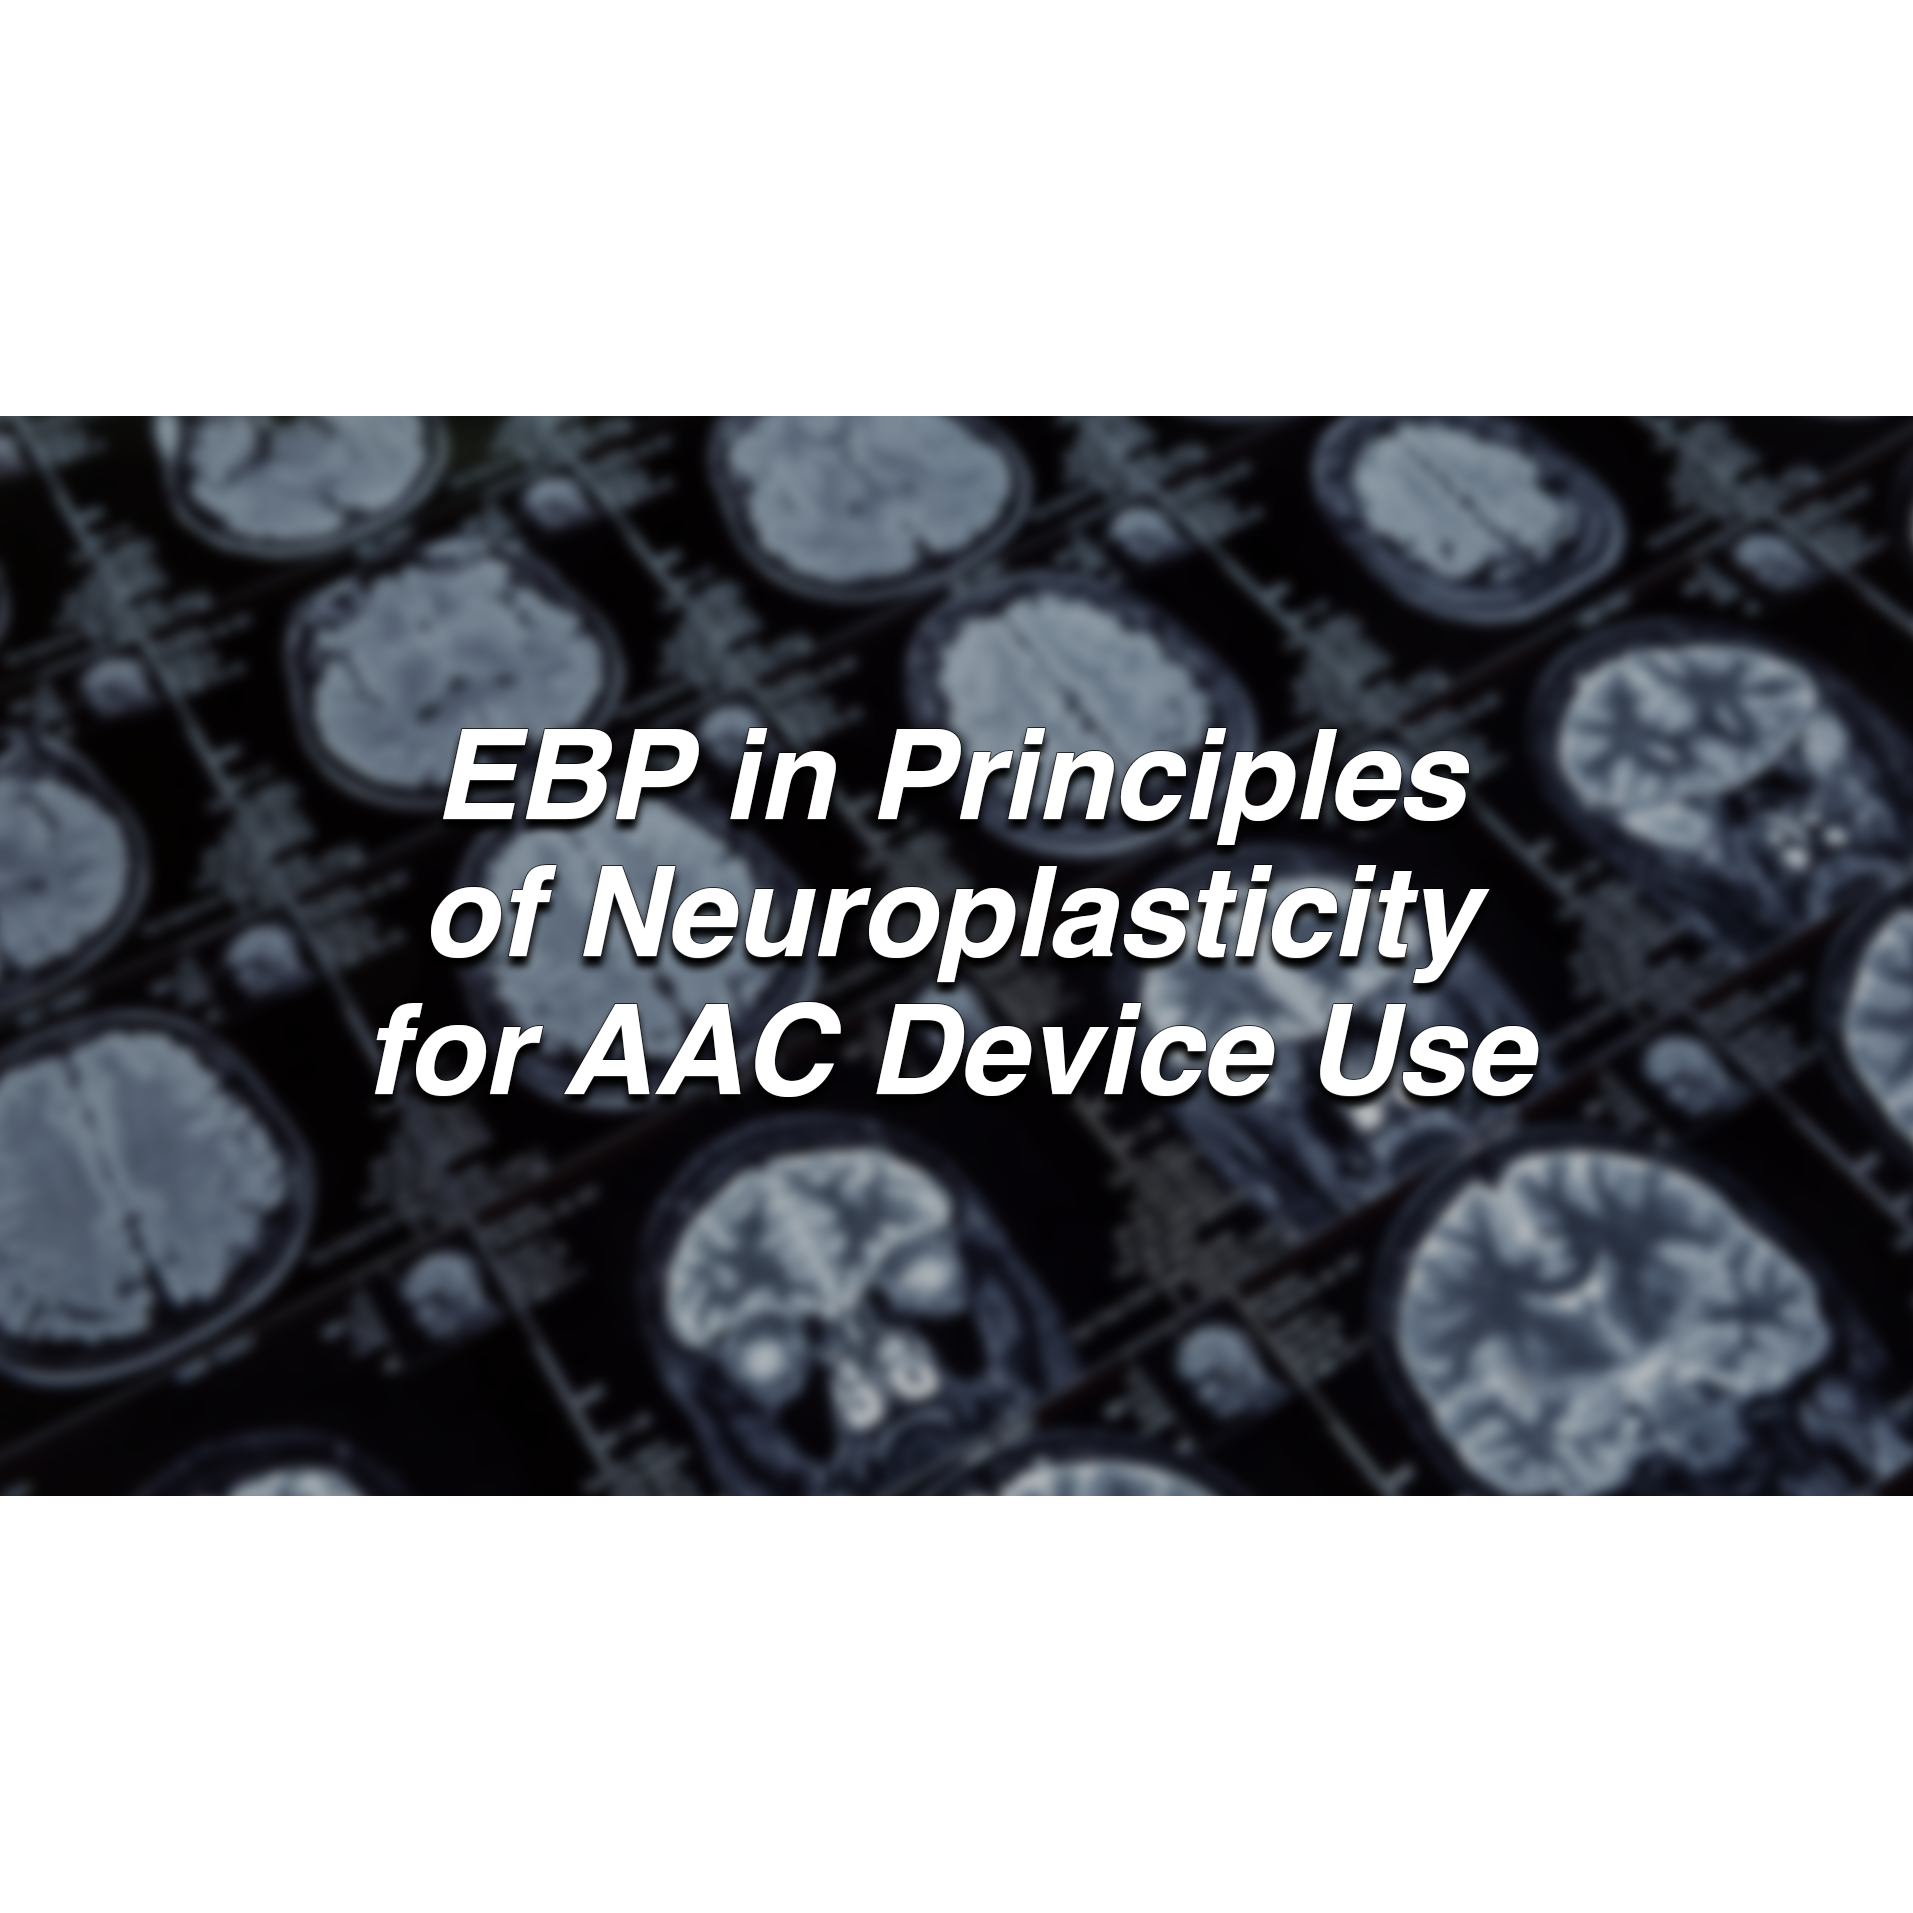 EBP in Principles of Neuroplasticity for AAC Device Use